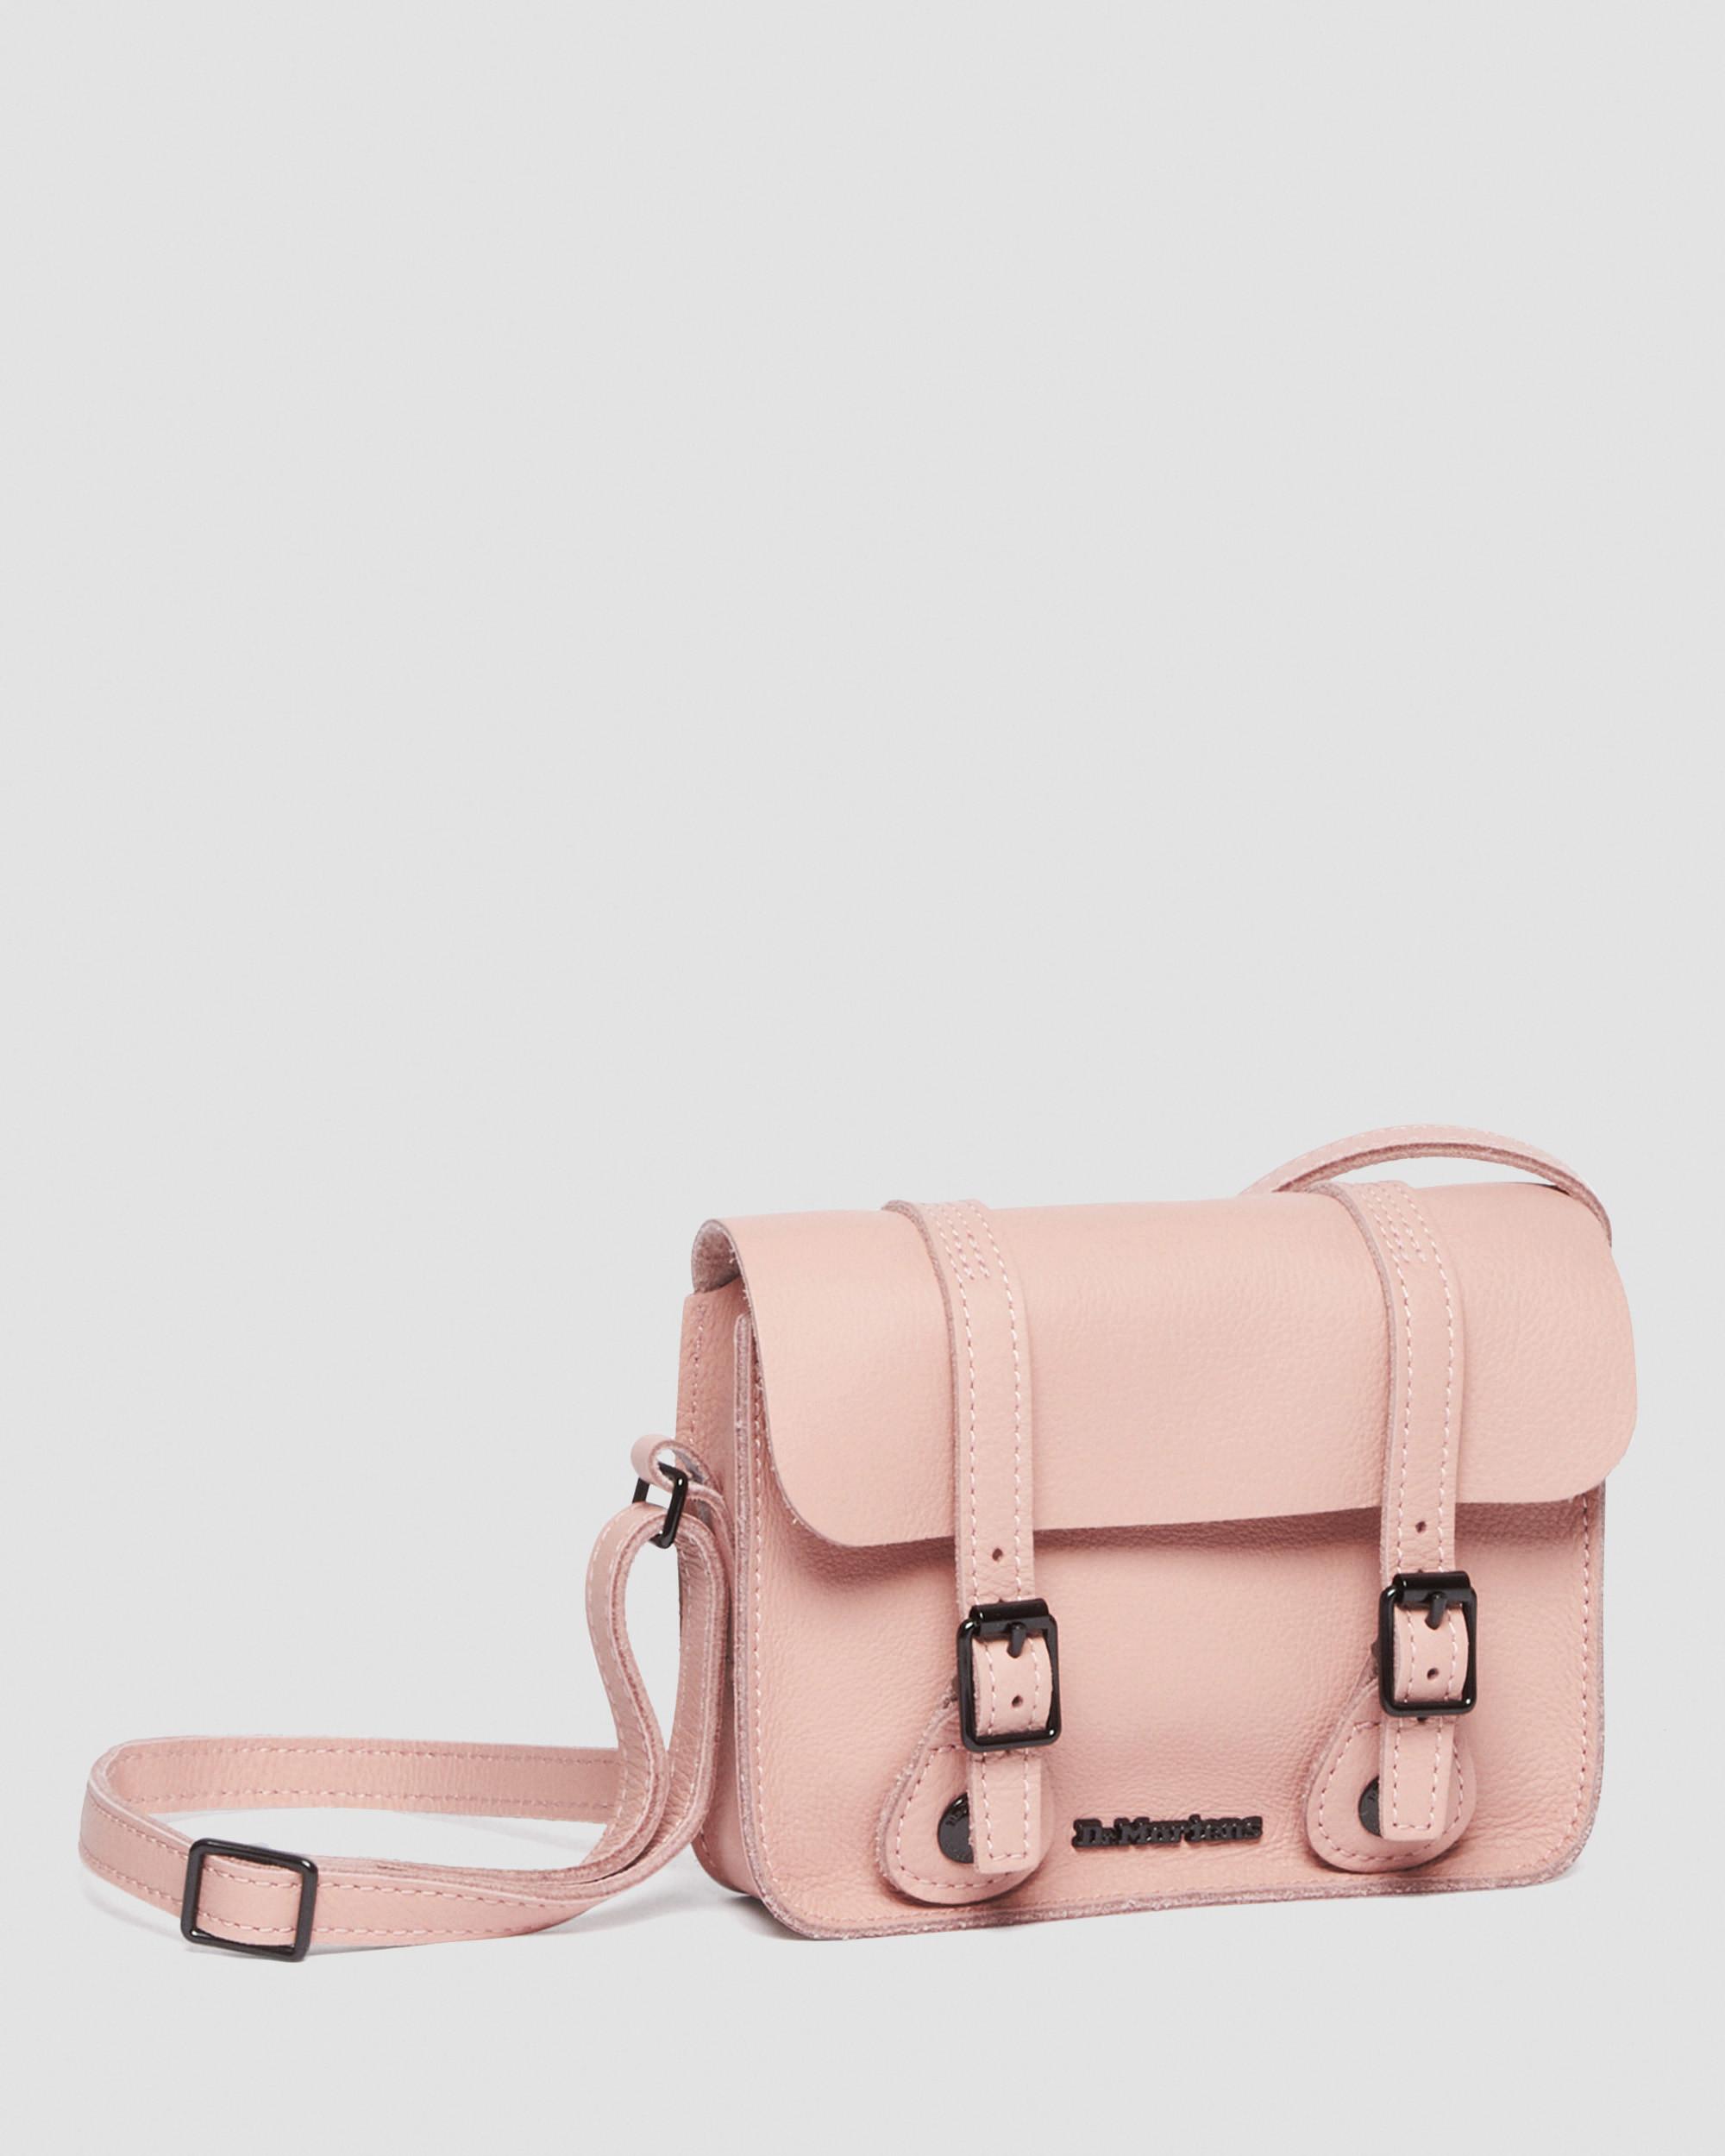 Dr. Martens 7 Inch Pisa Leather Crossbody Bag in Pink